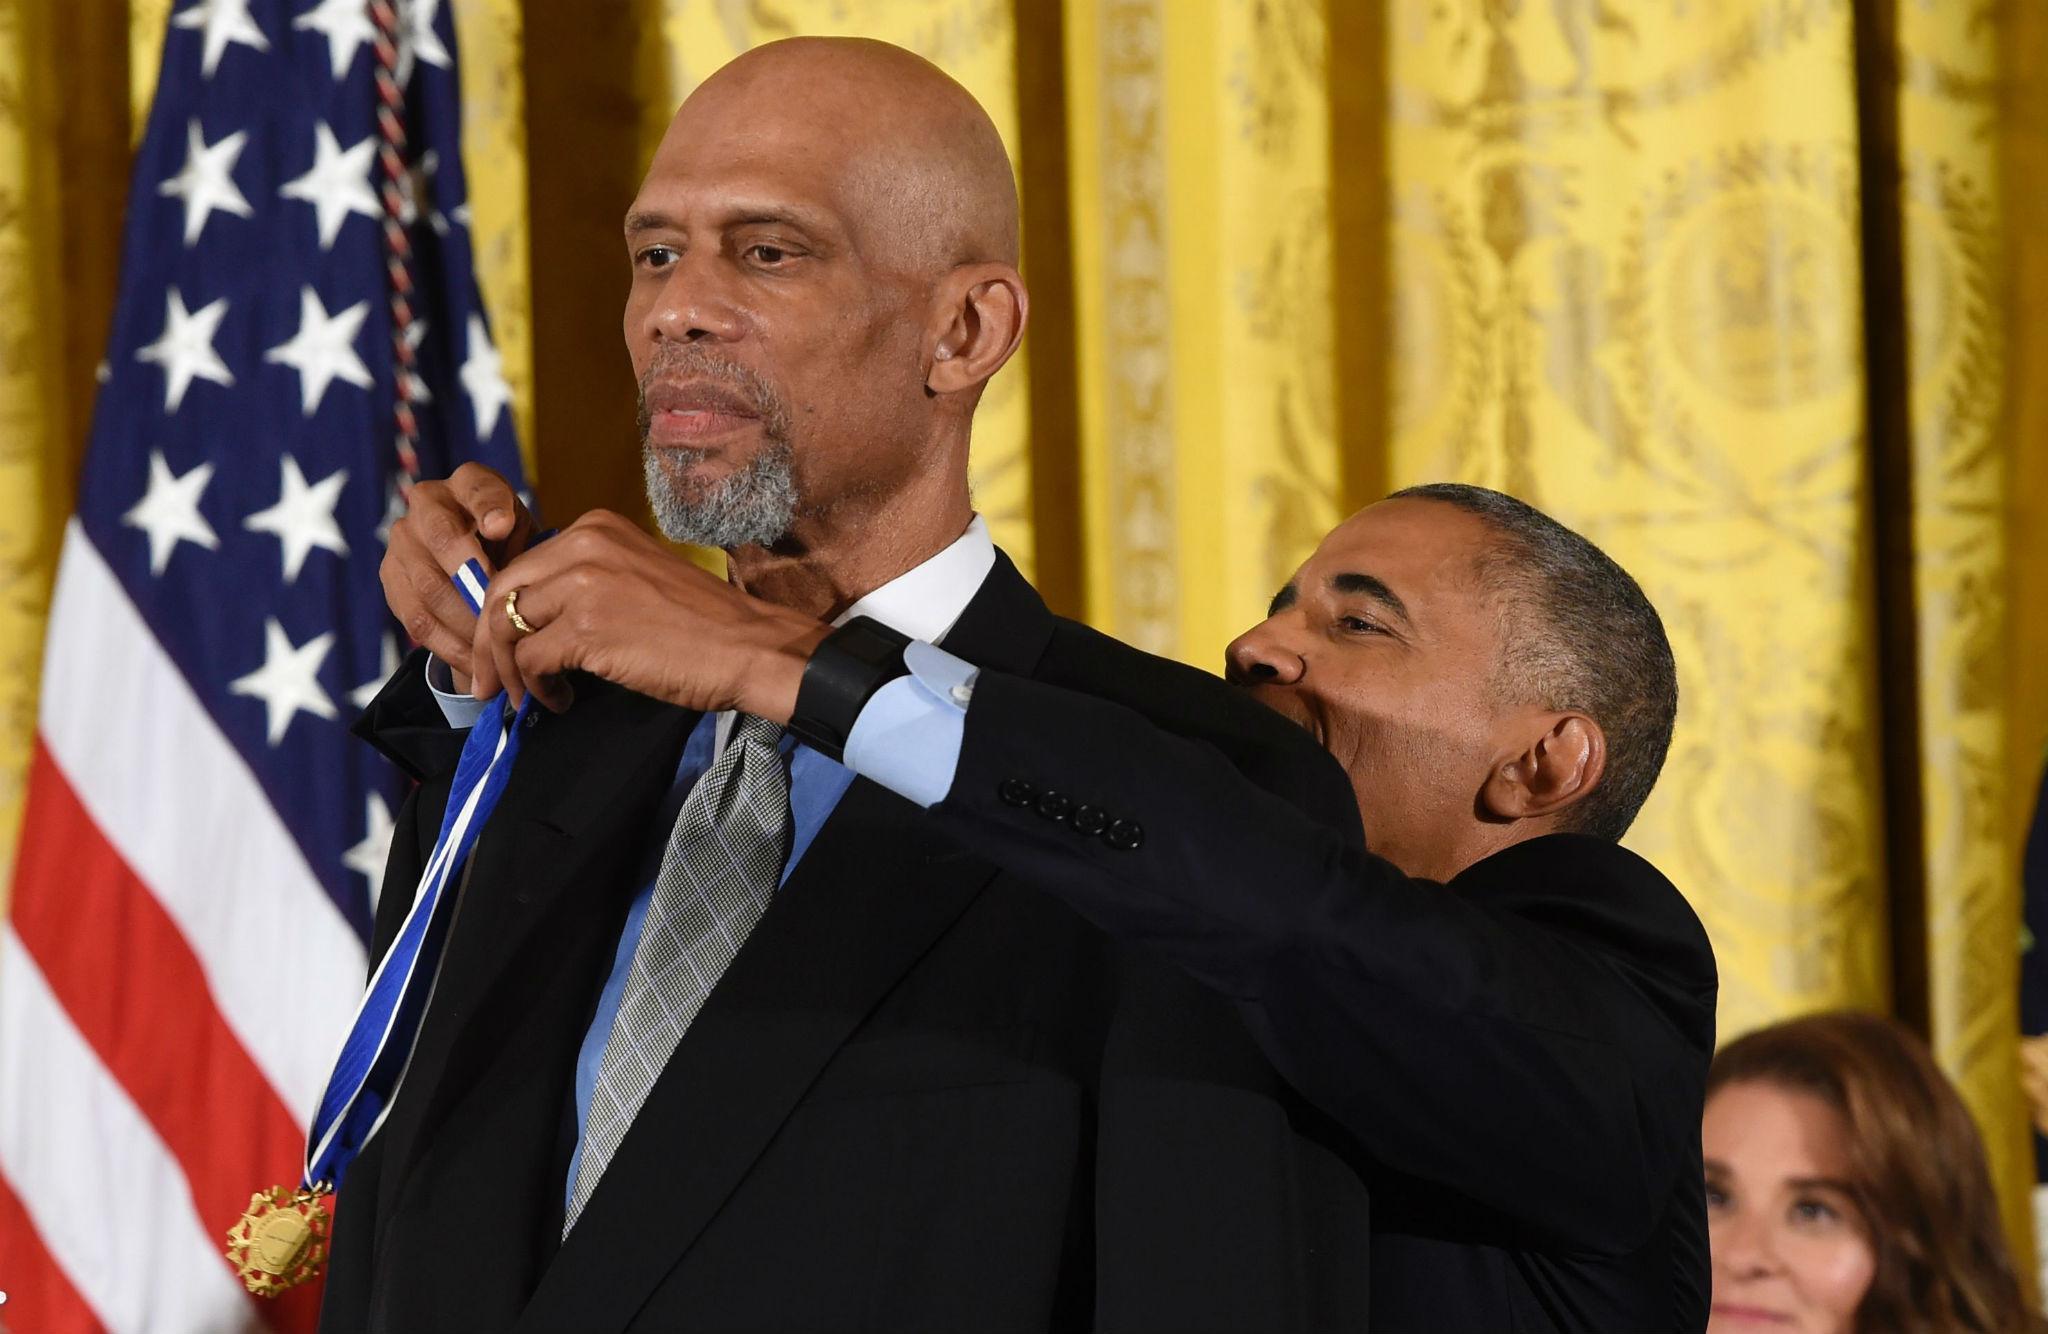 NBA legend Kareem Abdul-Jabbar is 7 foot 2, which made this part of the event a challenge even for Mr Obama, who is 6 foot 1